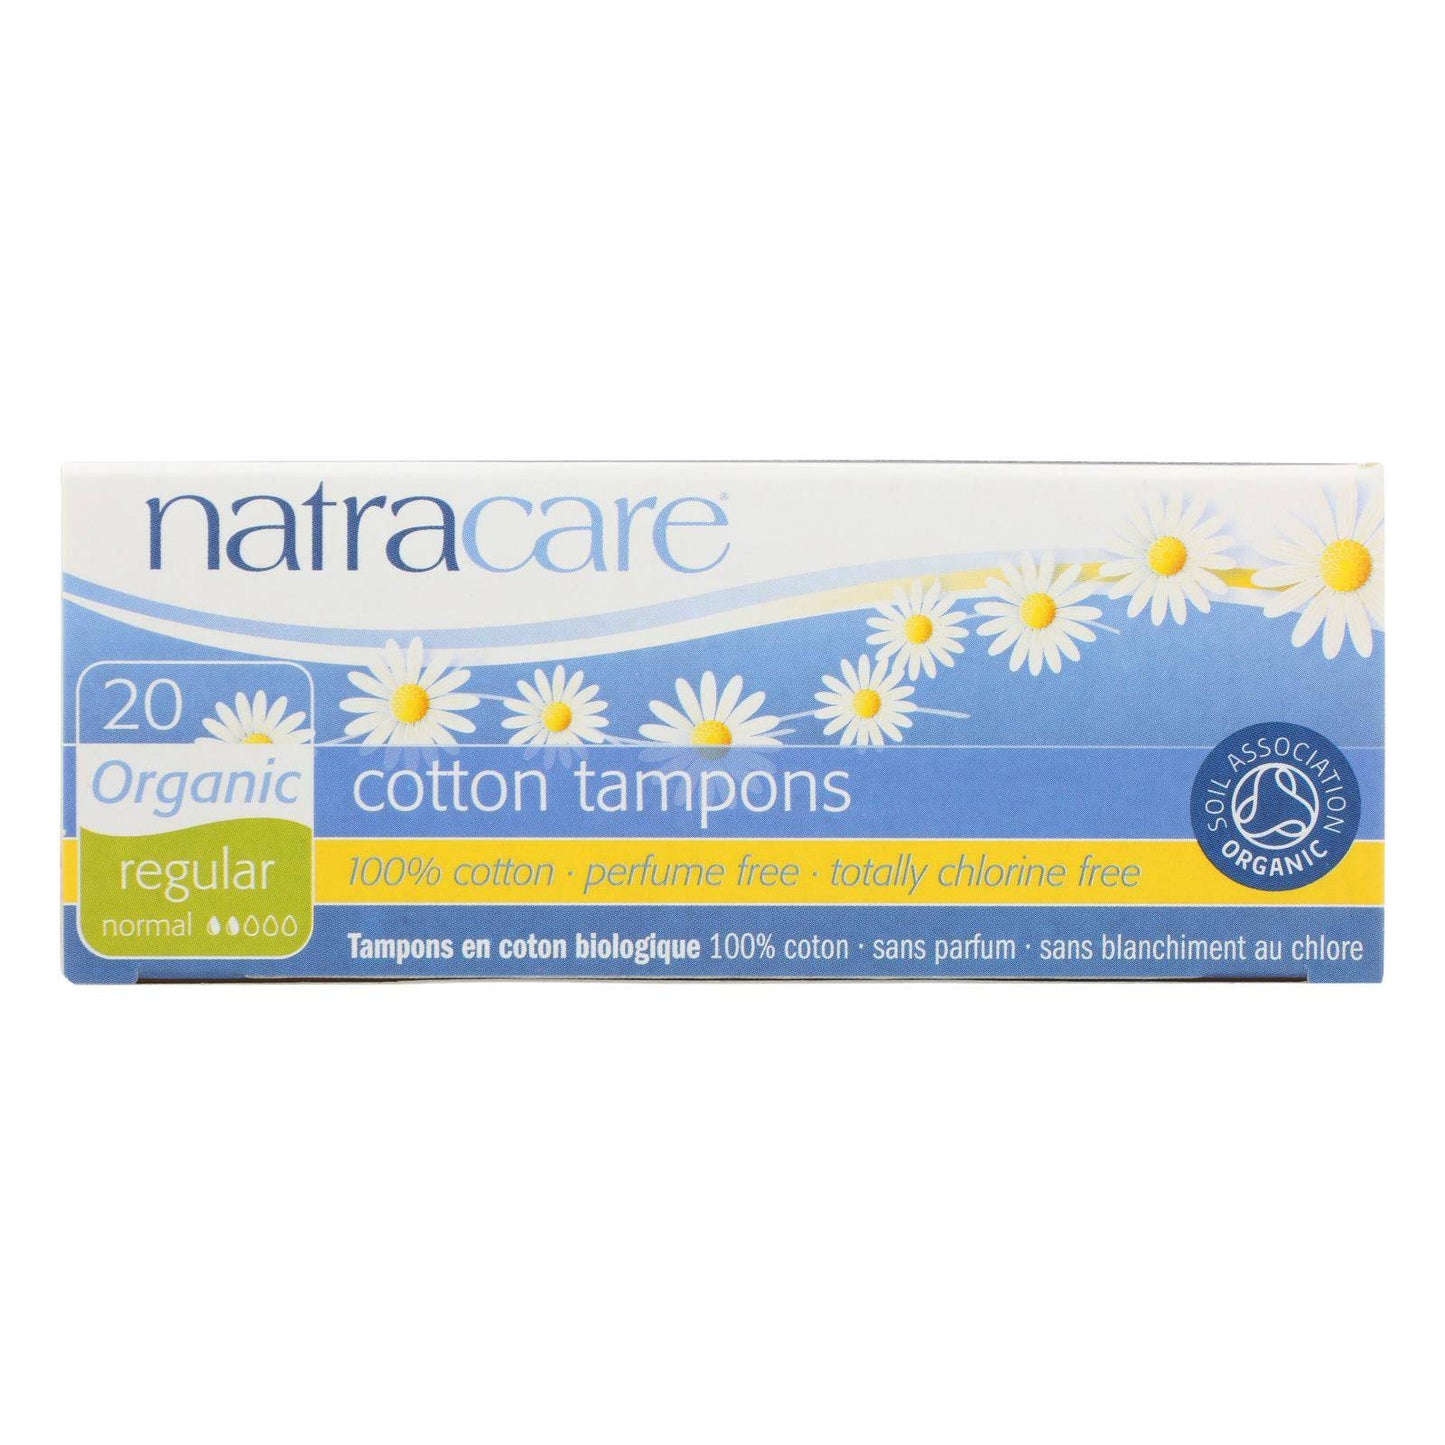 Natracare 100% Organic Cotton Tampons Regular - 20 Tampons | OnlyNaturals.us